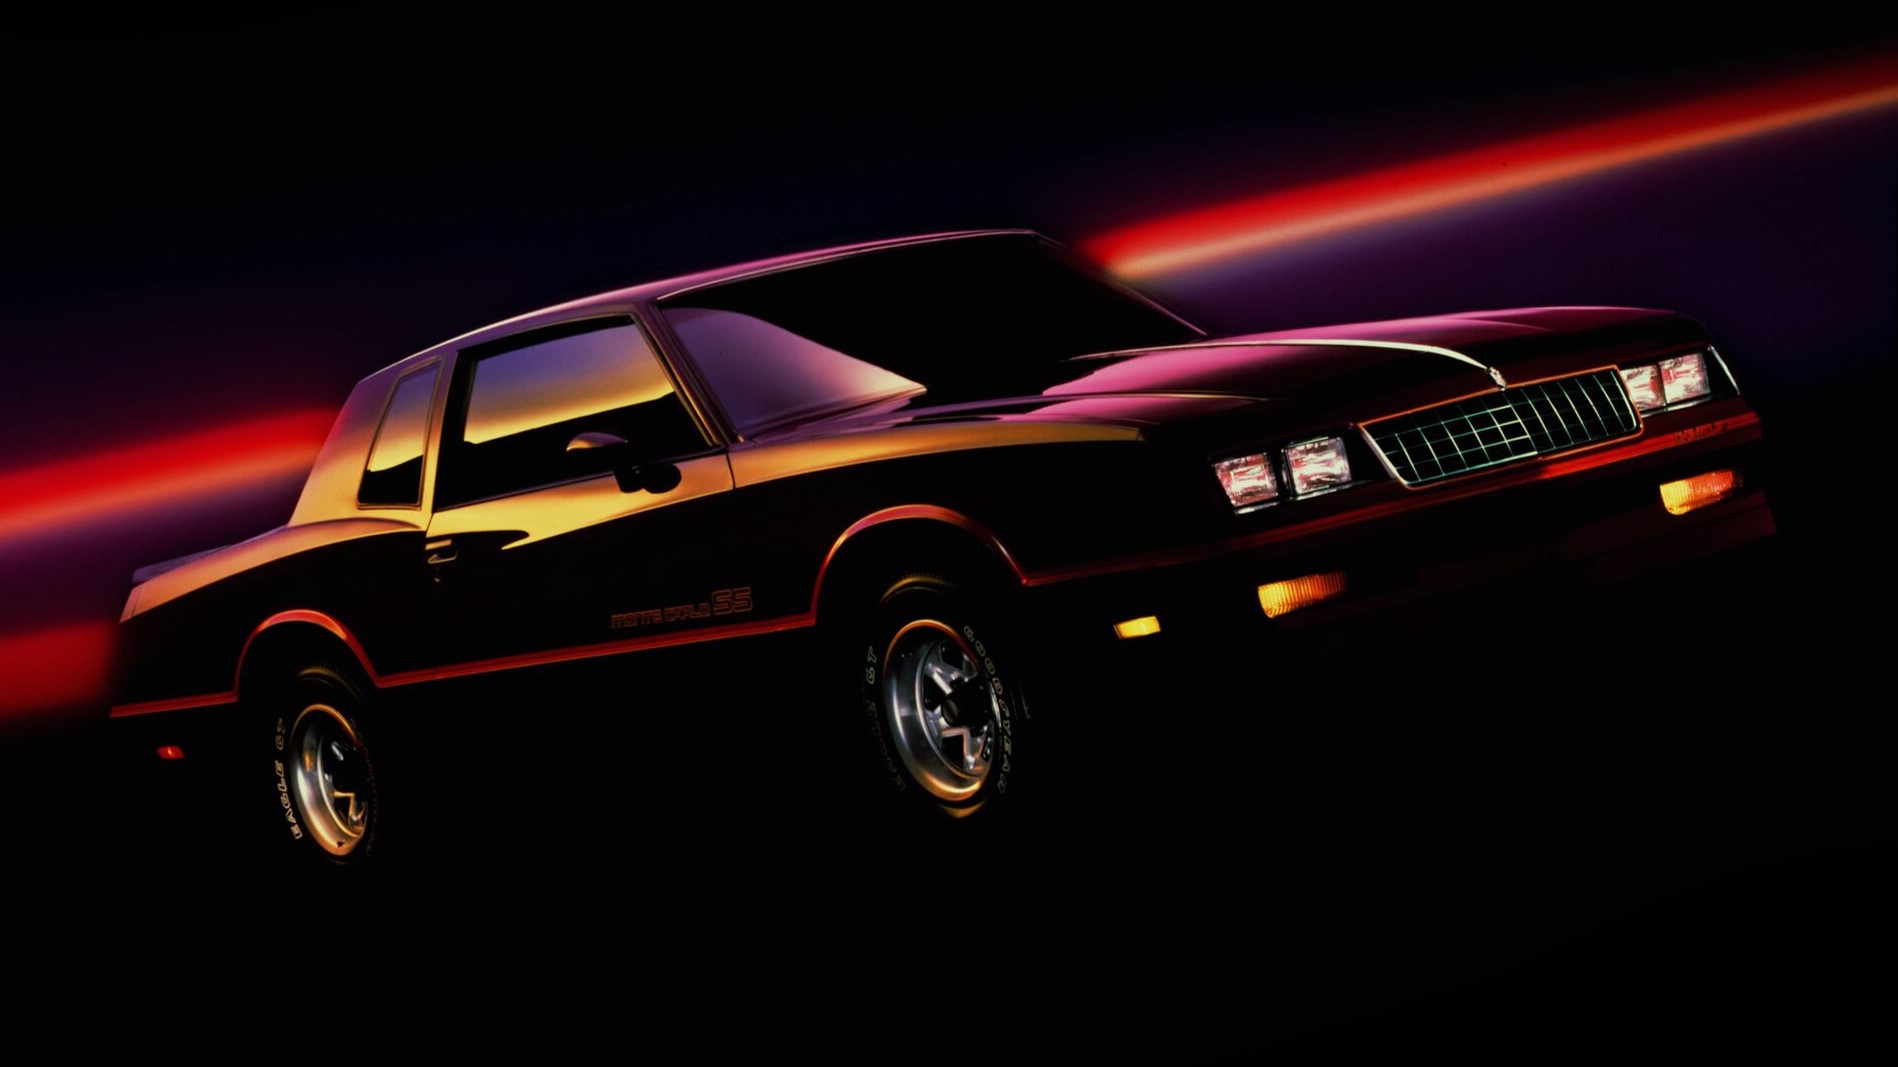 The Ups and Downs of the Chevrolet Monte Carlo